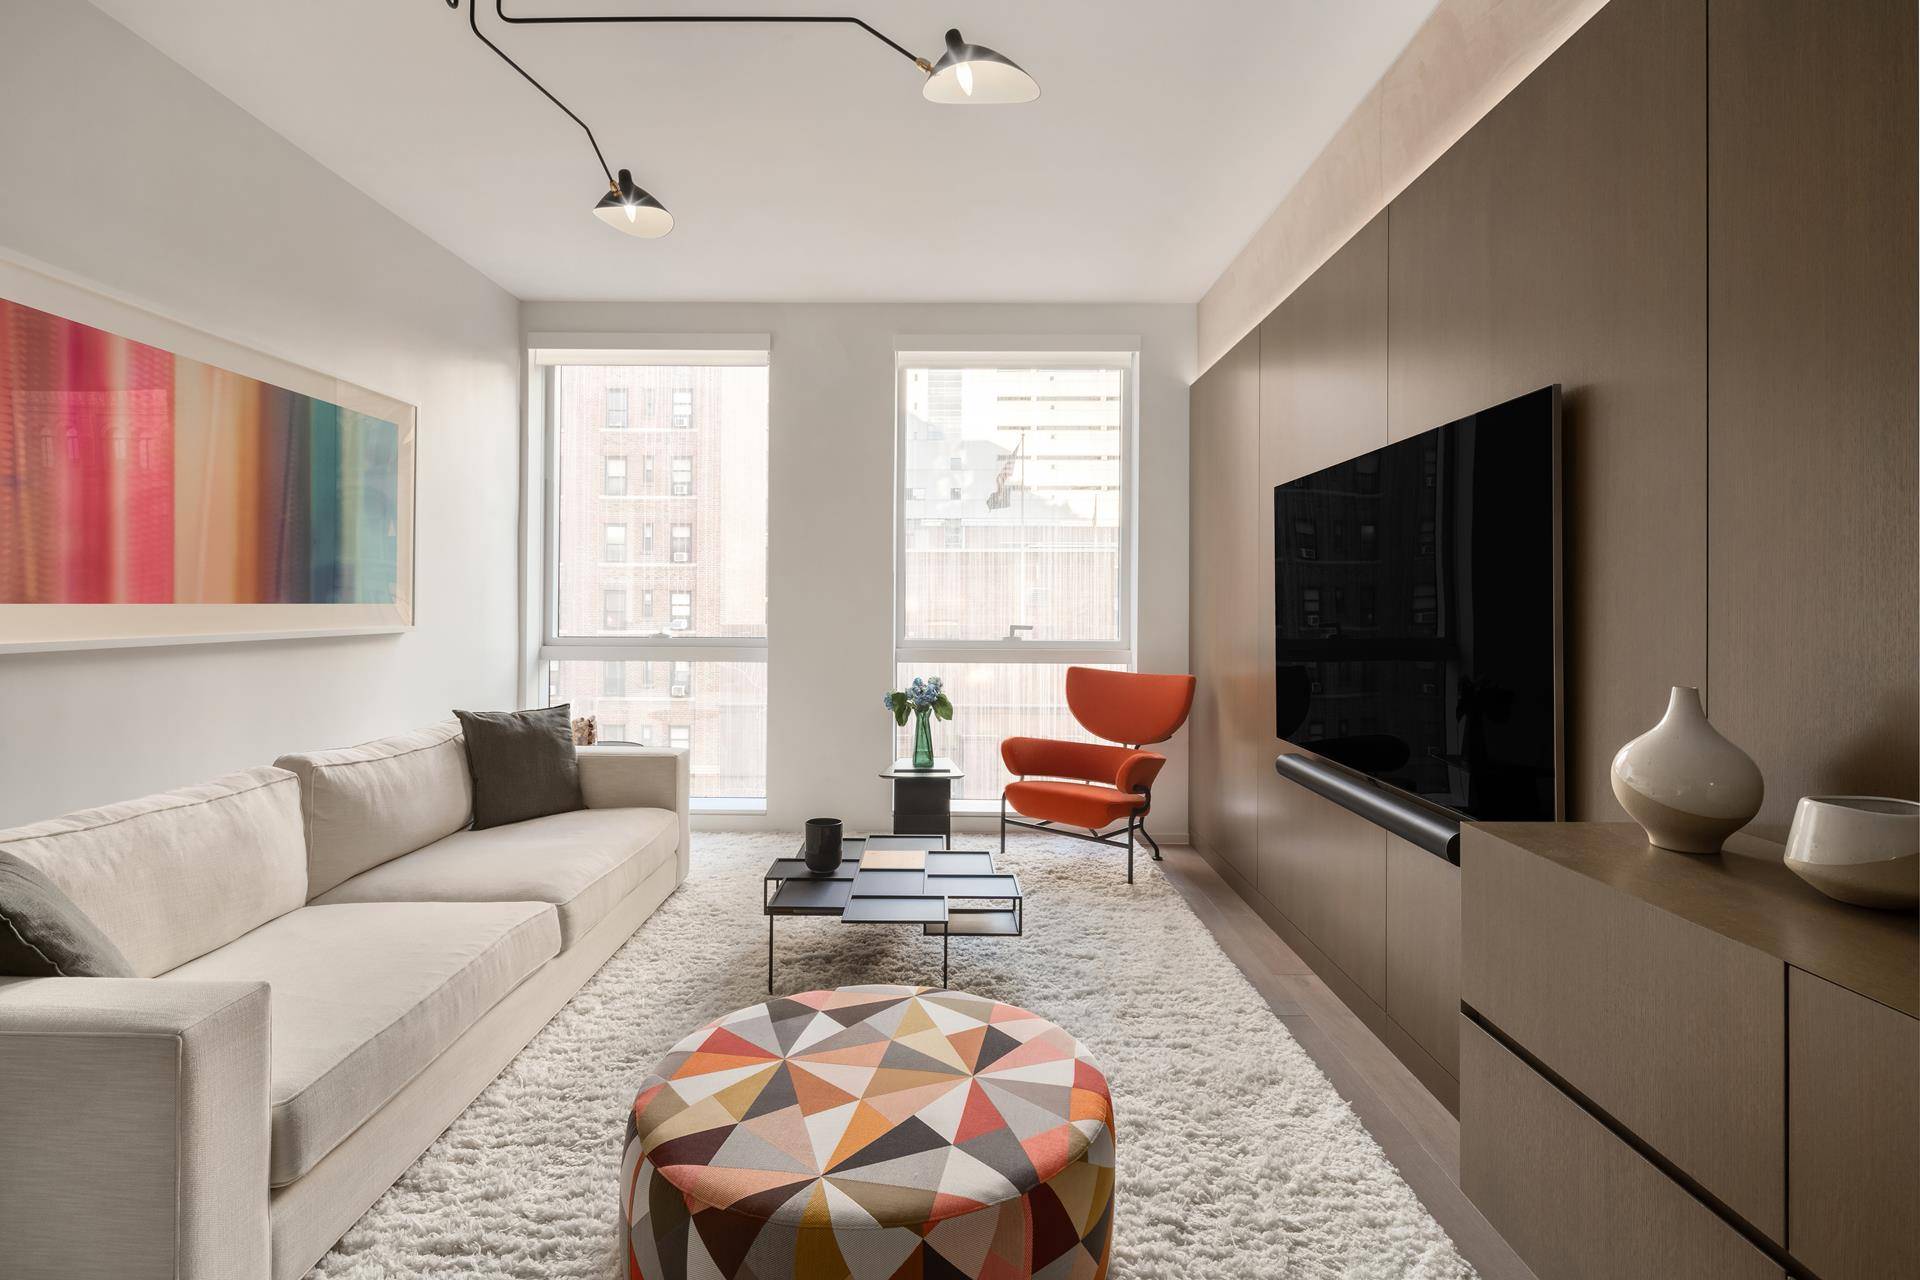 Triple mint designer 3 bedroom 3 bath in the heart of Gramercy and steps to Madison Square Park.